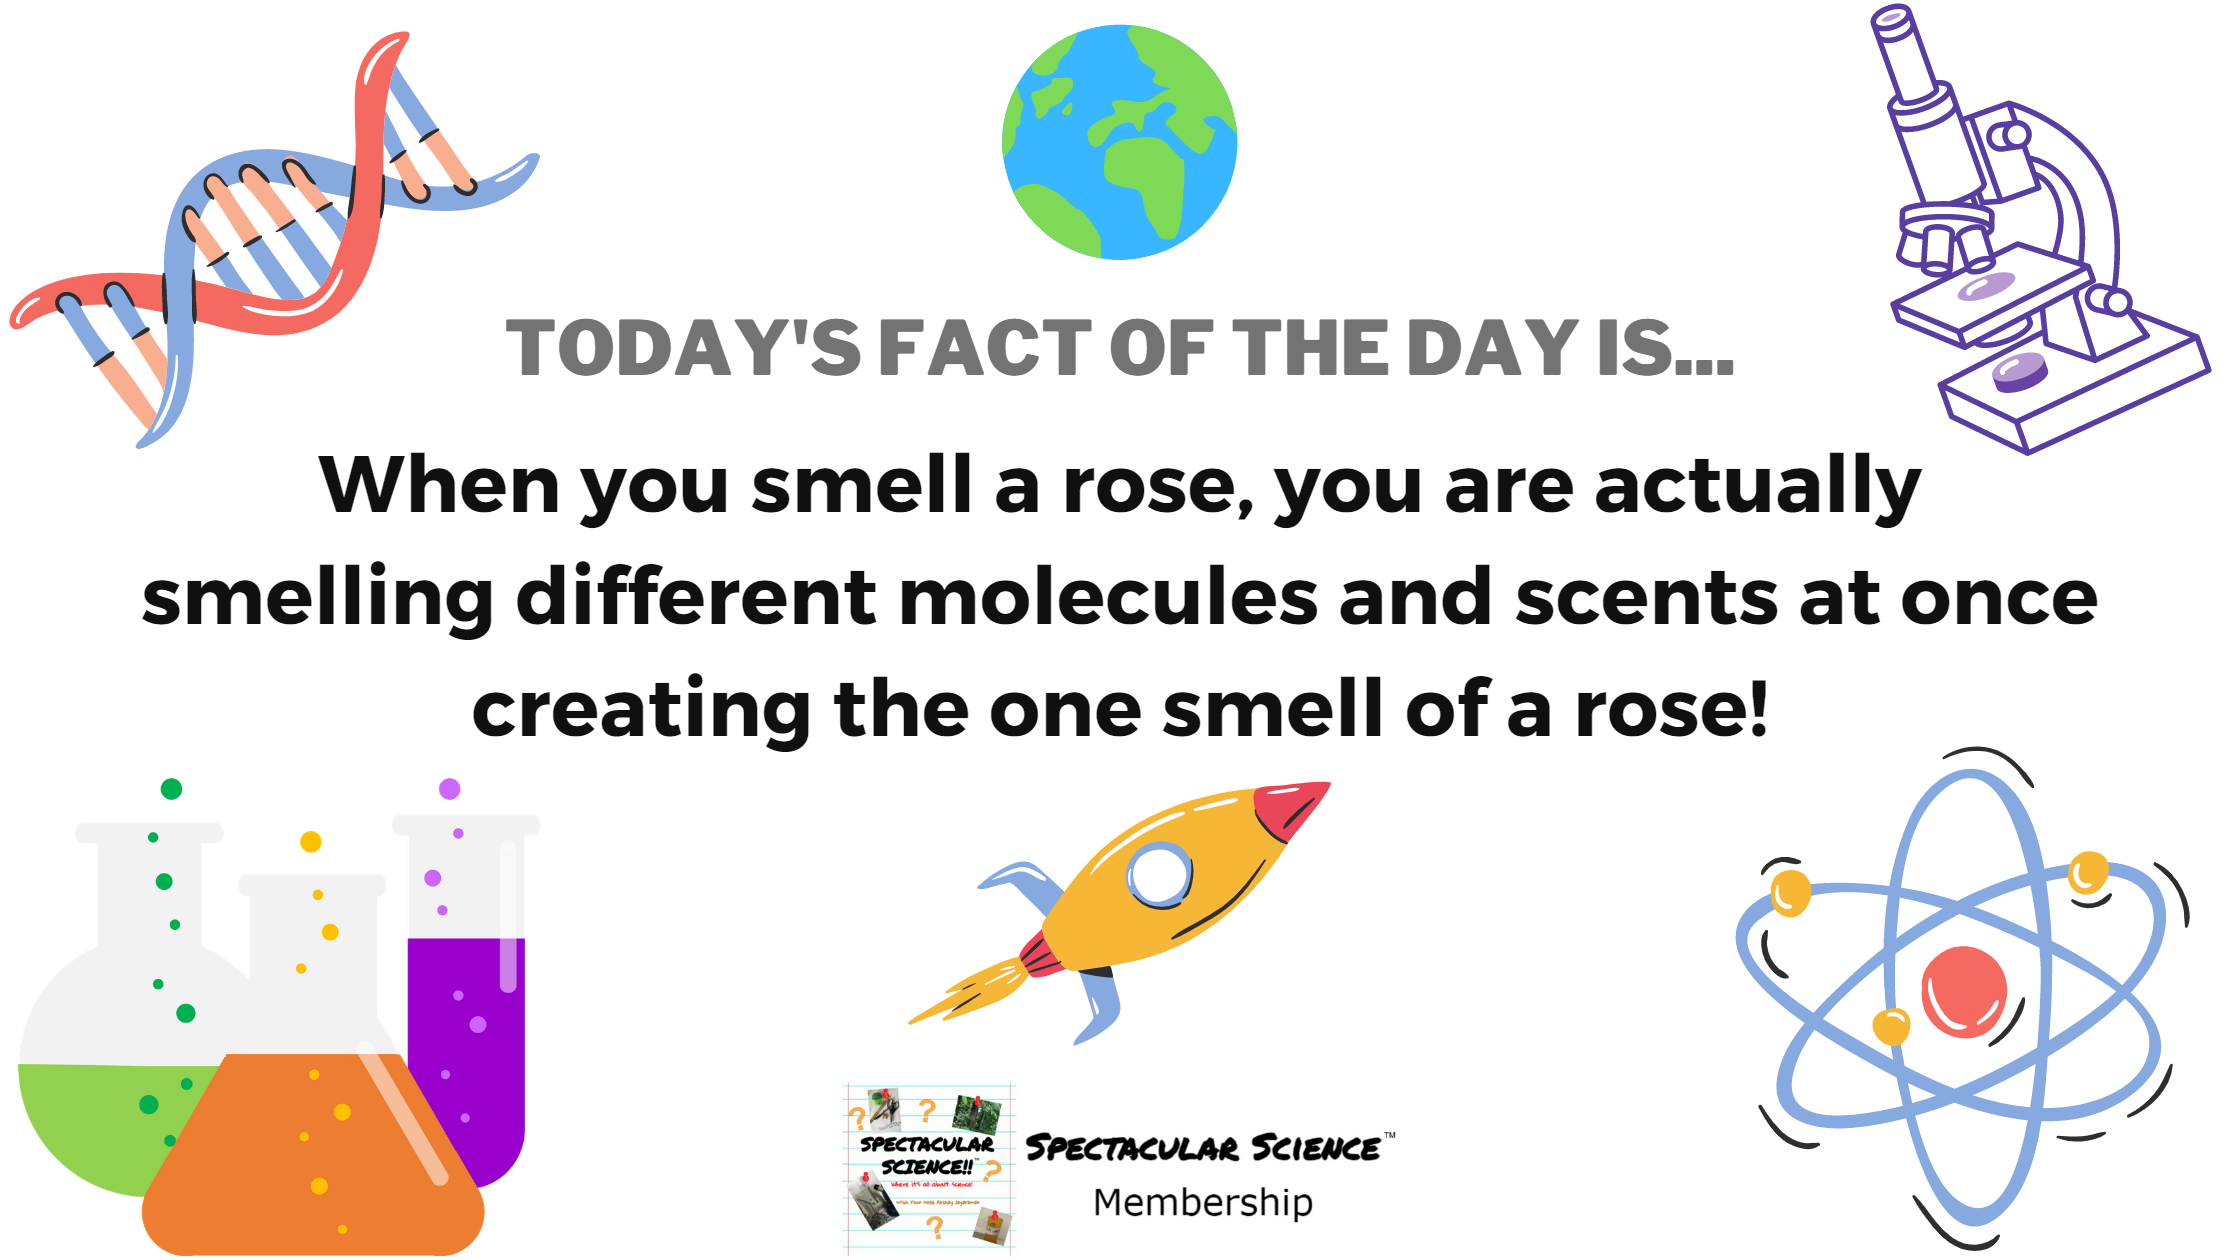 Fact of the Day Image May 2nd